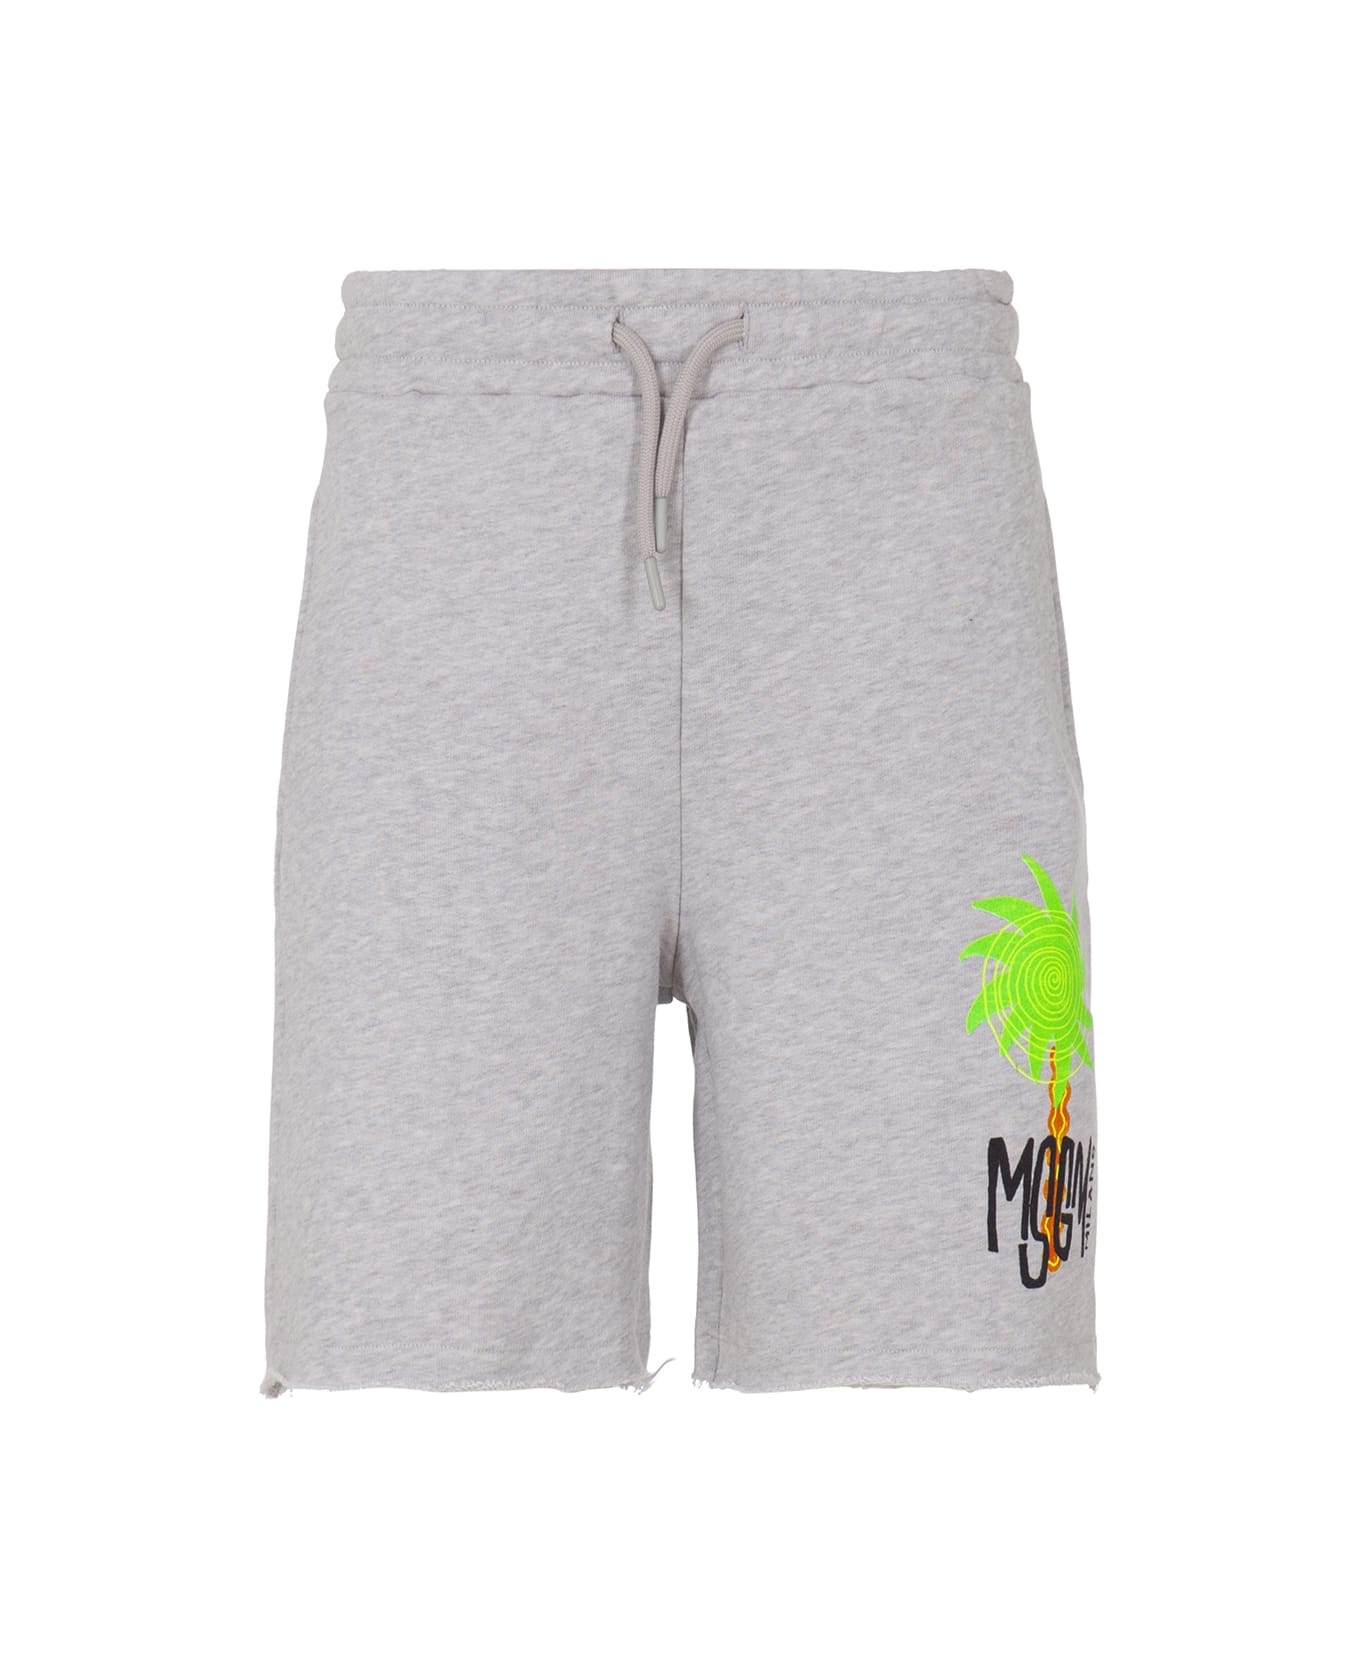 MSGM Shorts With Print - Gray